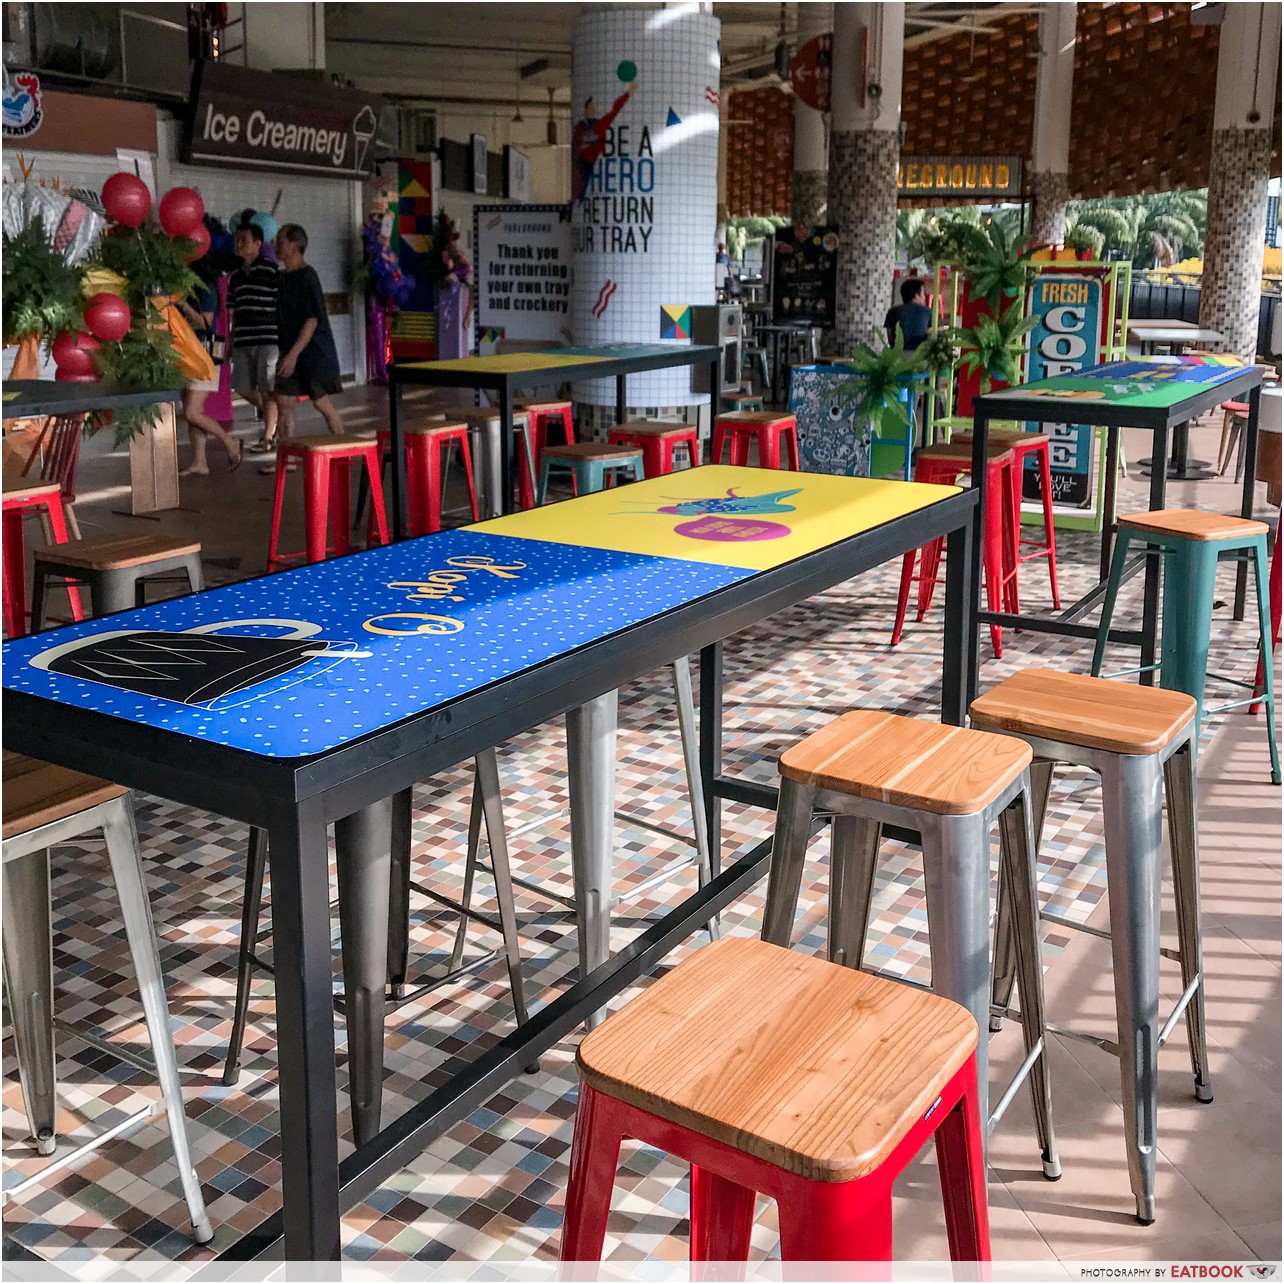 hipster hawker centres - fareground